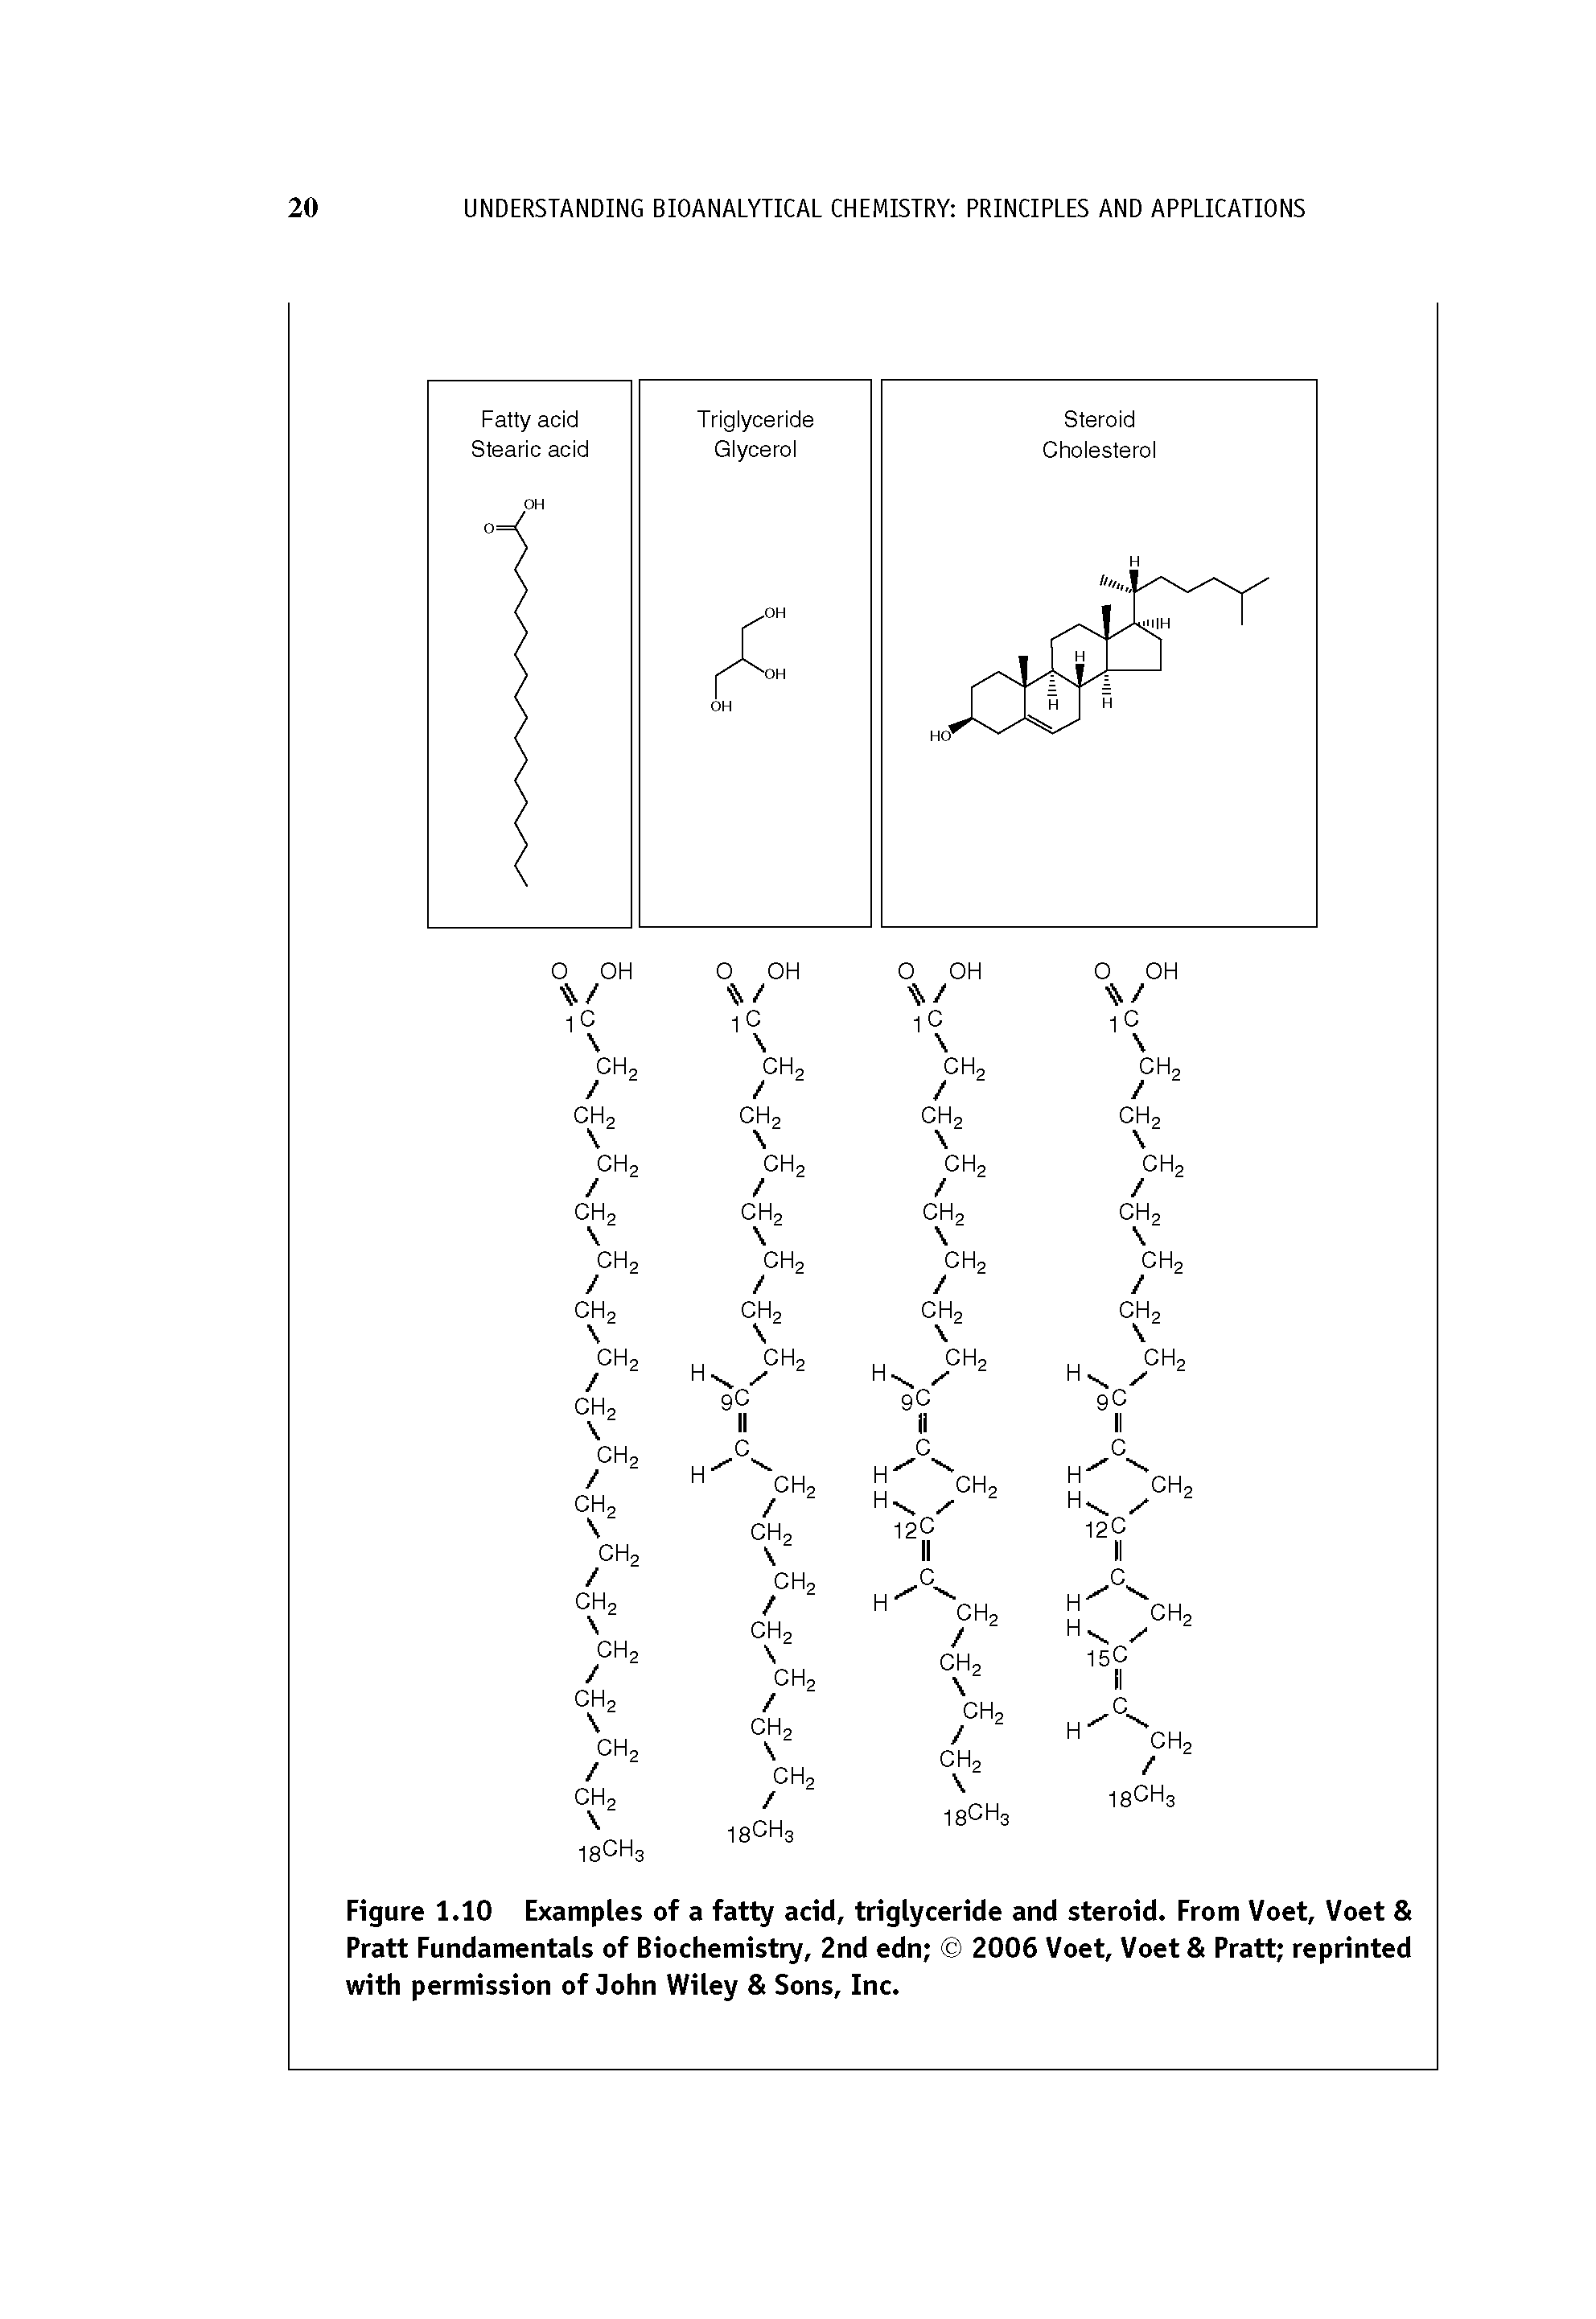 Figure 1.10 Examples of a fatty acid, triglyceride and steroid. From Voet, Voet Pratt Fundamentals of Biochemistry, 2nd edn 2006 Voet, Voet Pratt reprinted with permission of John Wiley Sons, Inc.